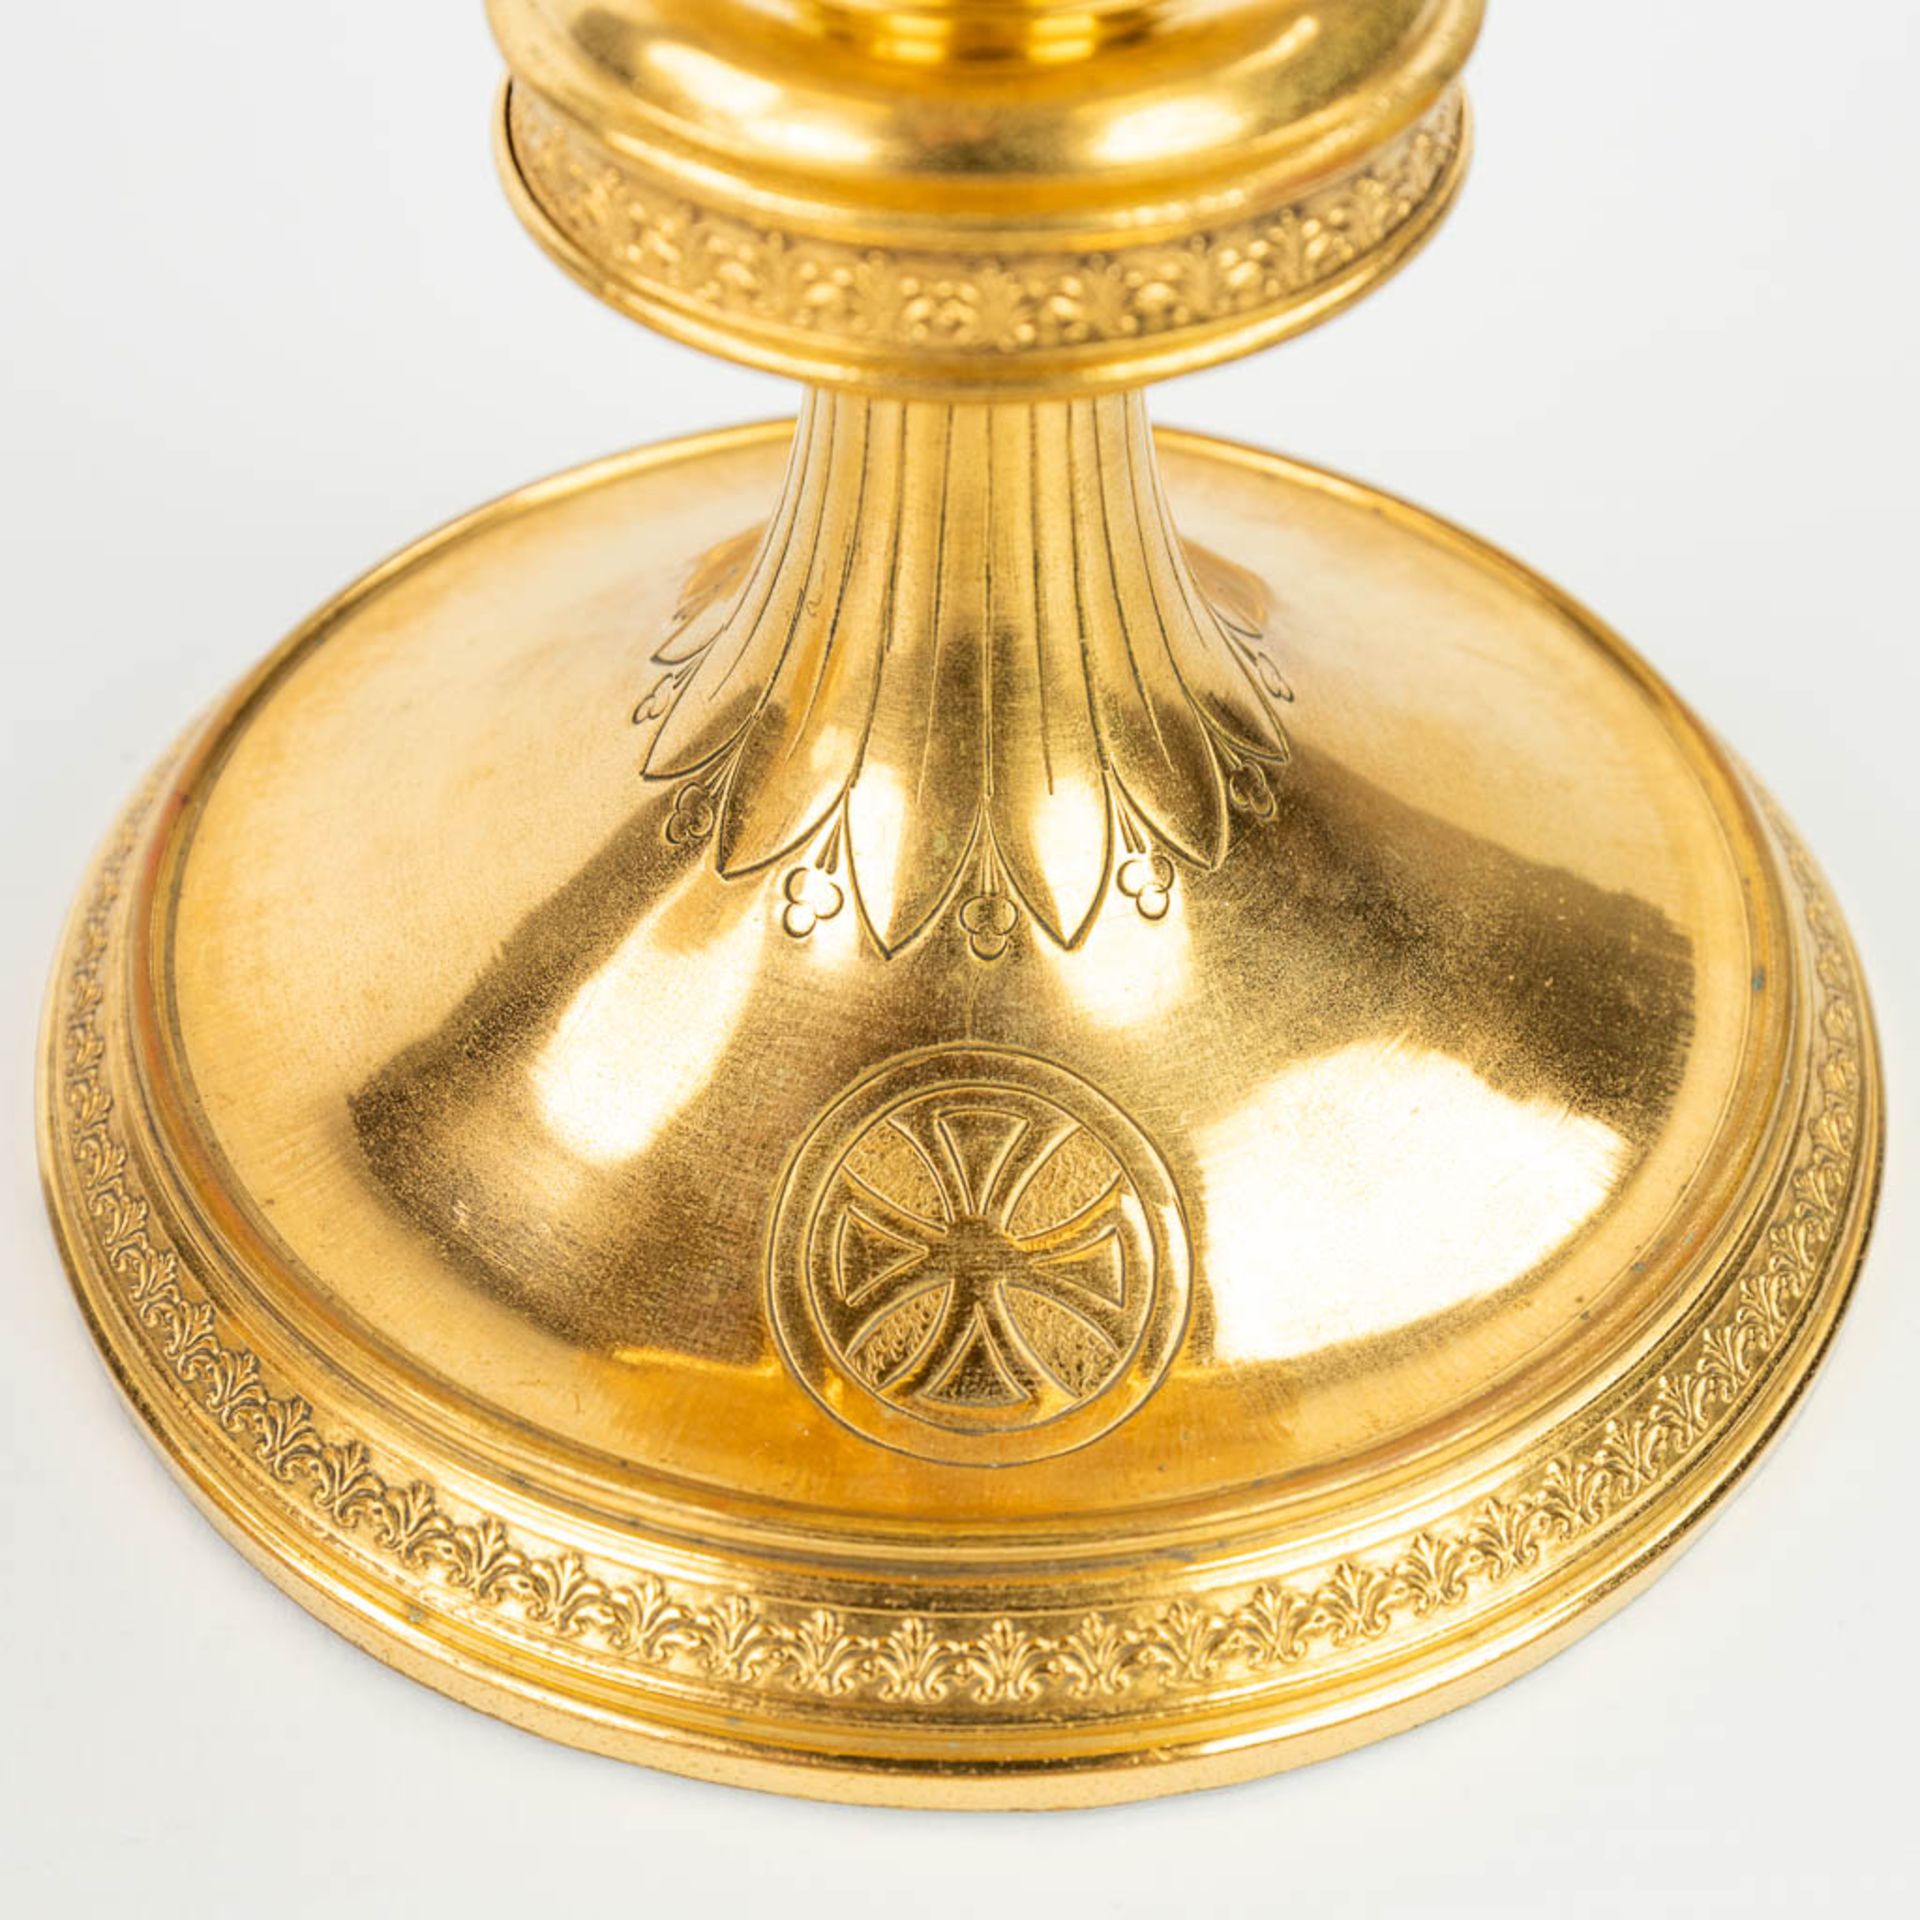 A collection of 4 large ciboria and a chalice made of silver and gold plated metal. - Image 10 of 24